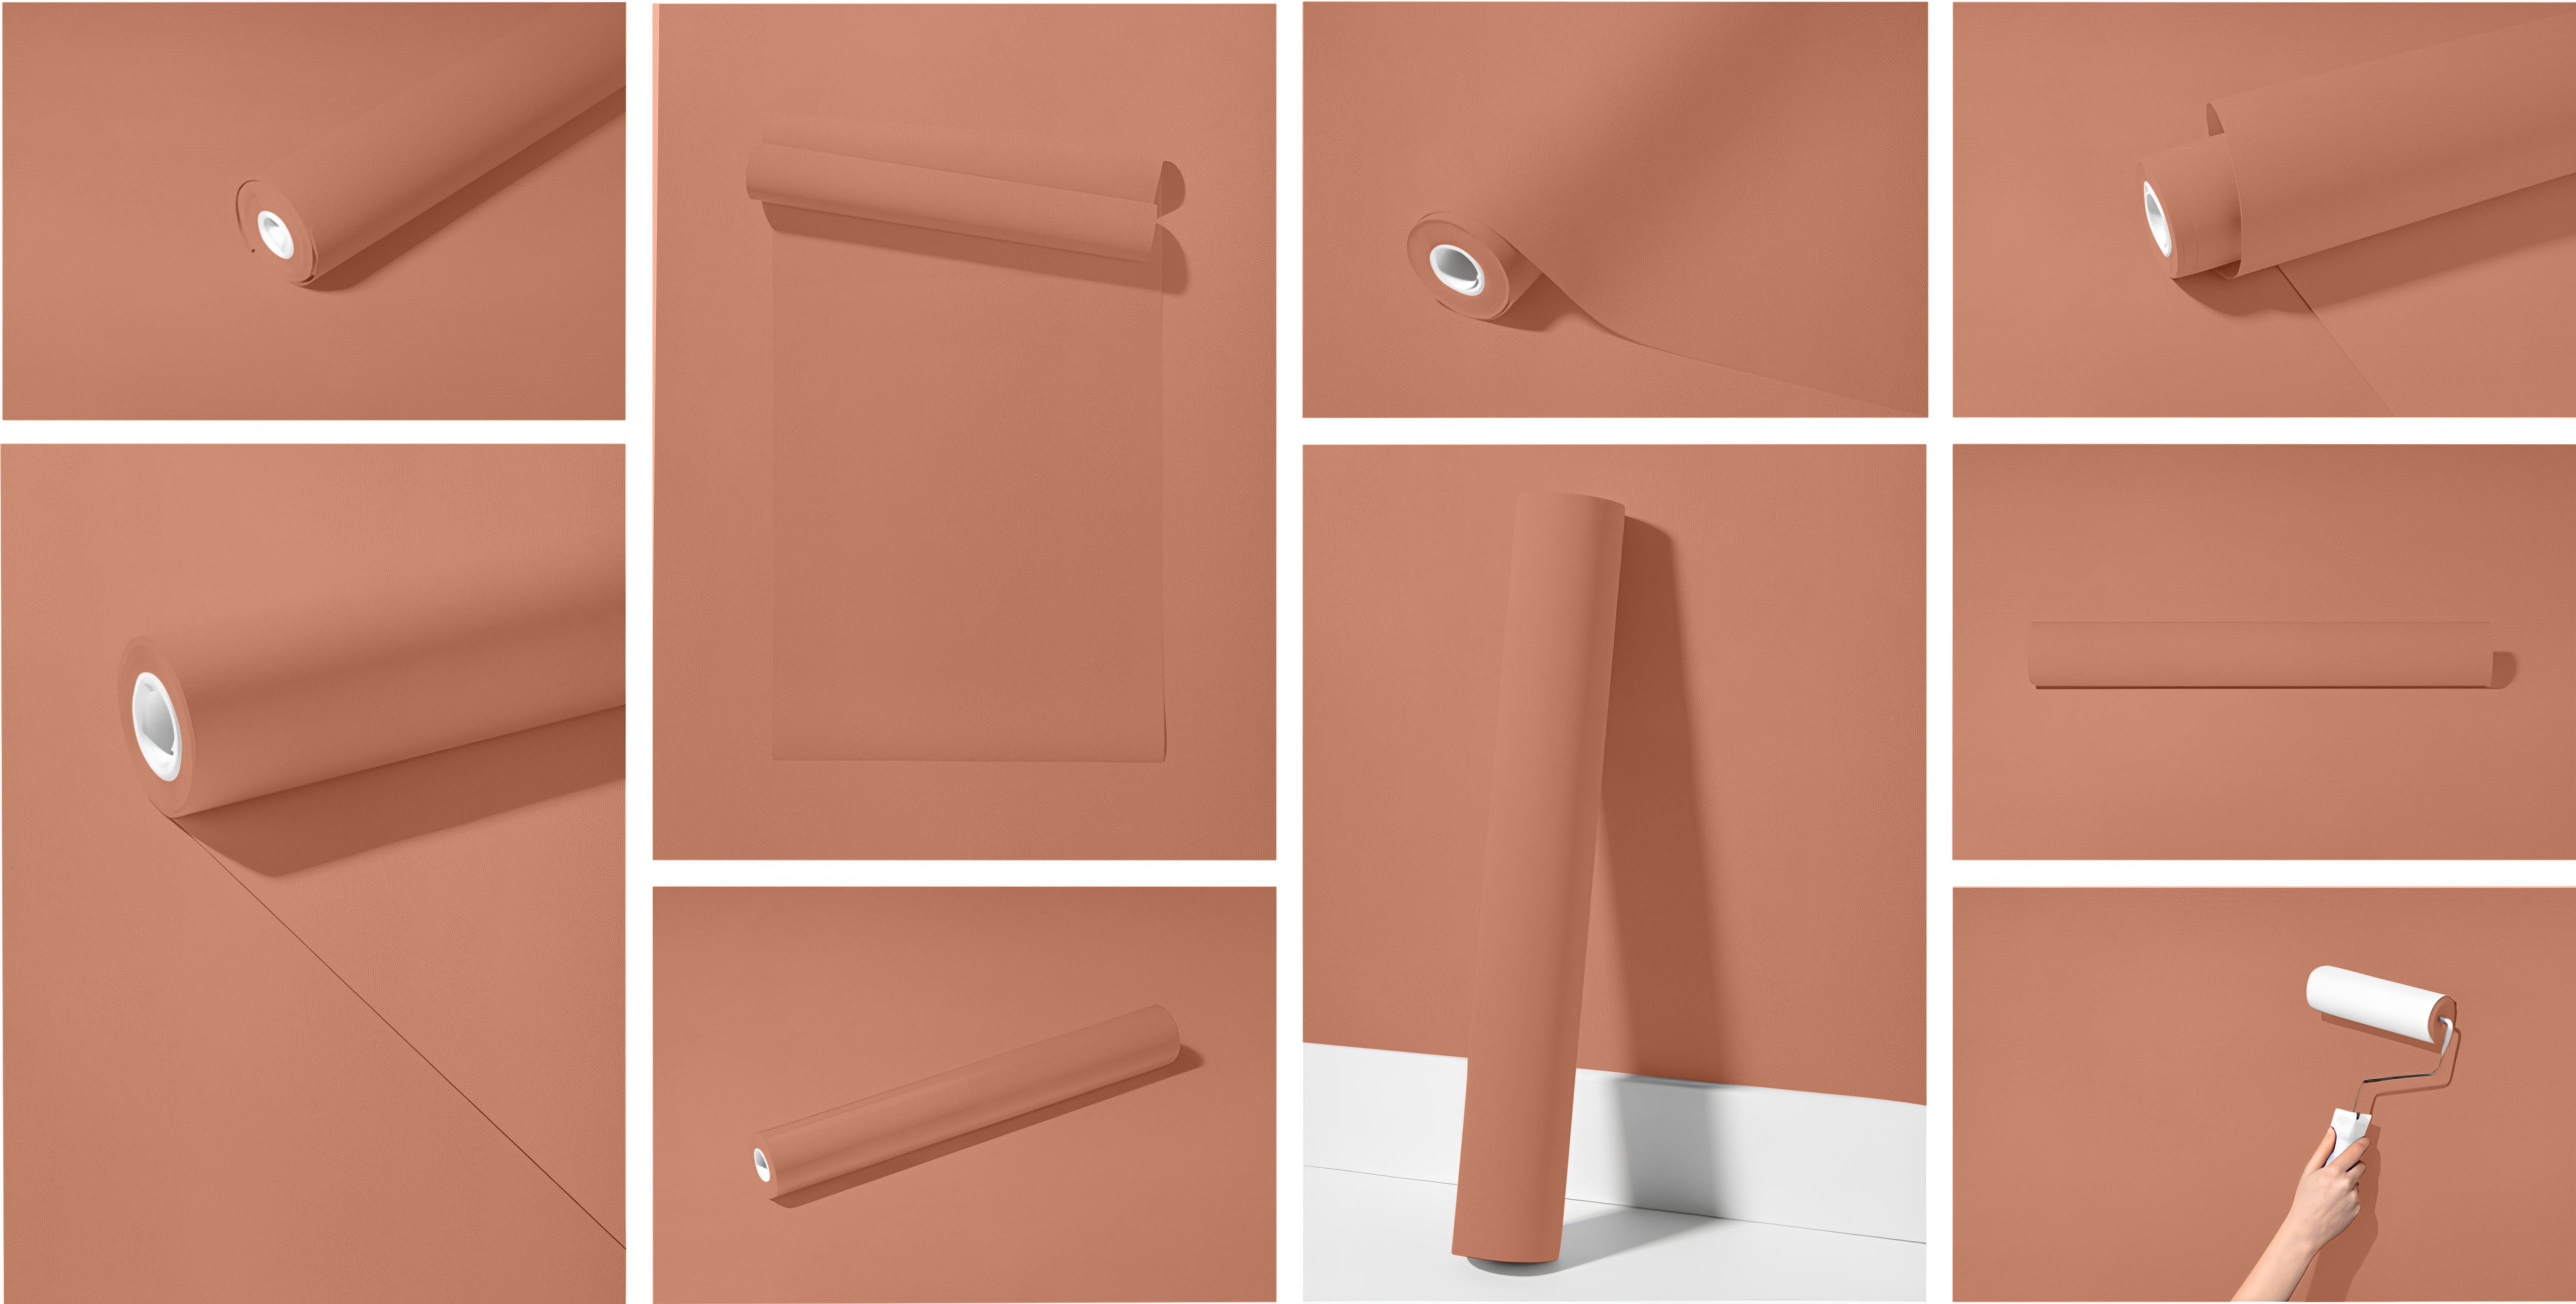 Peel & Stick Removable Re-usable Paint - Color RAL 3012 Beige Red - offRAL™ - RALRAW LLC, USA